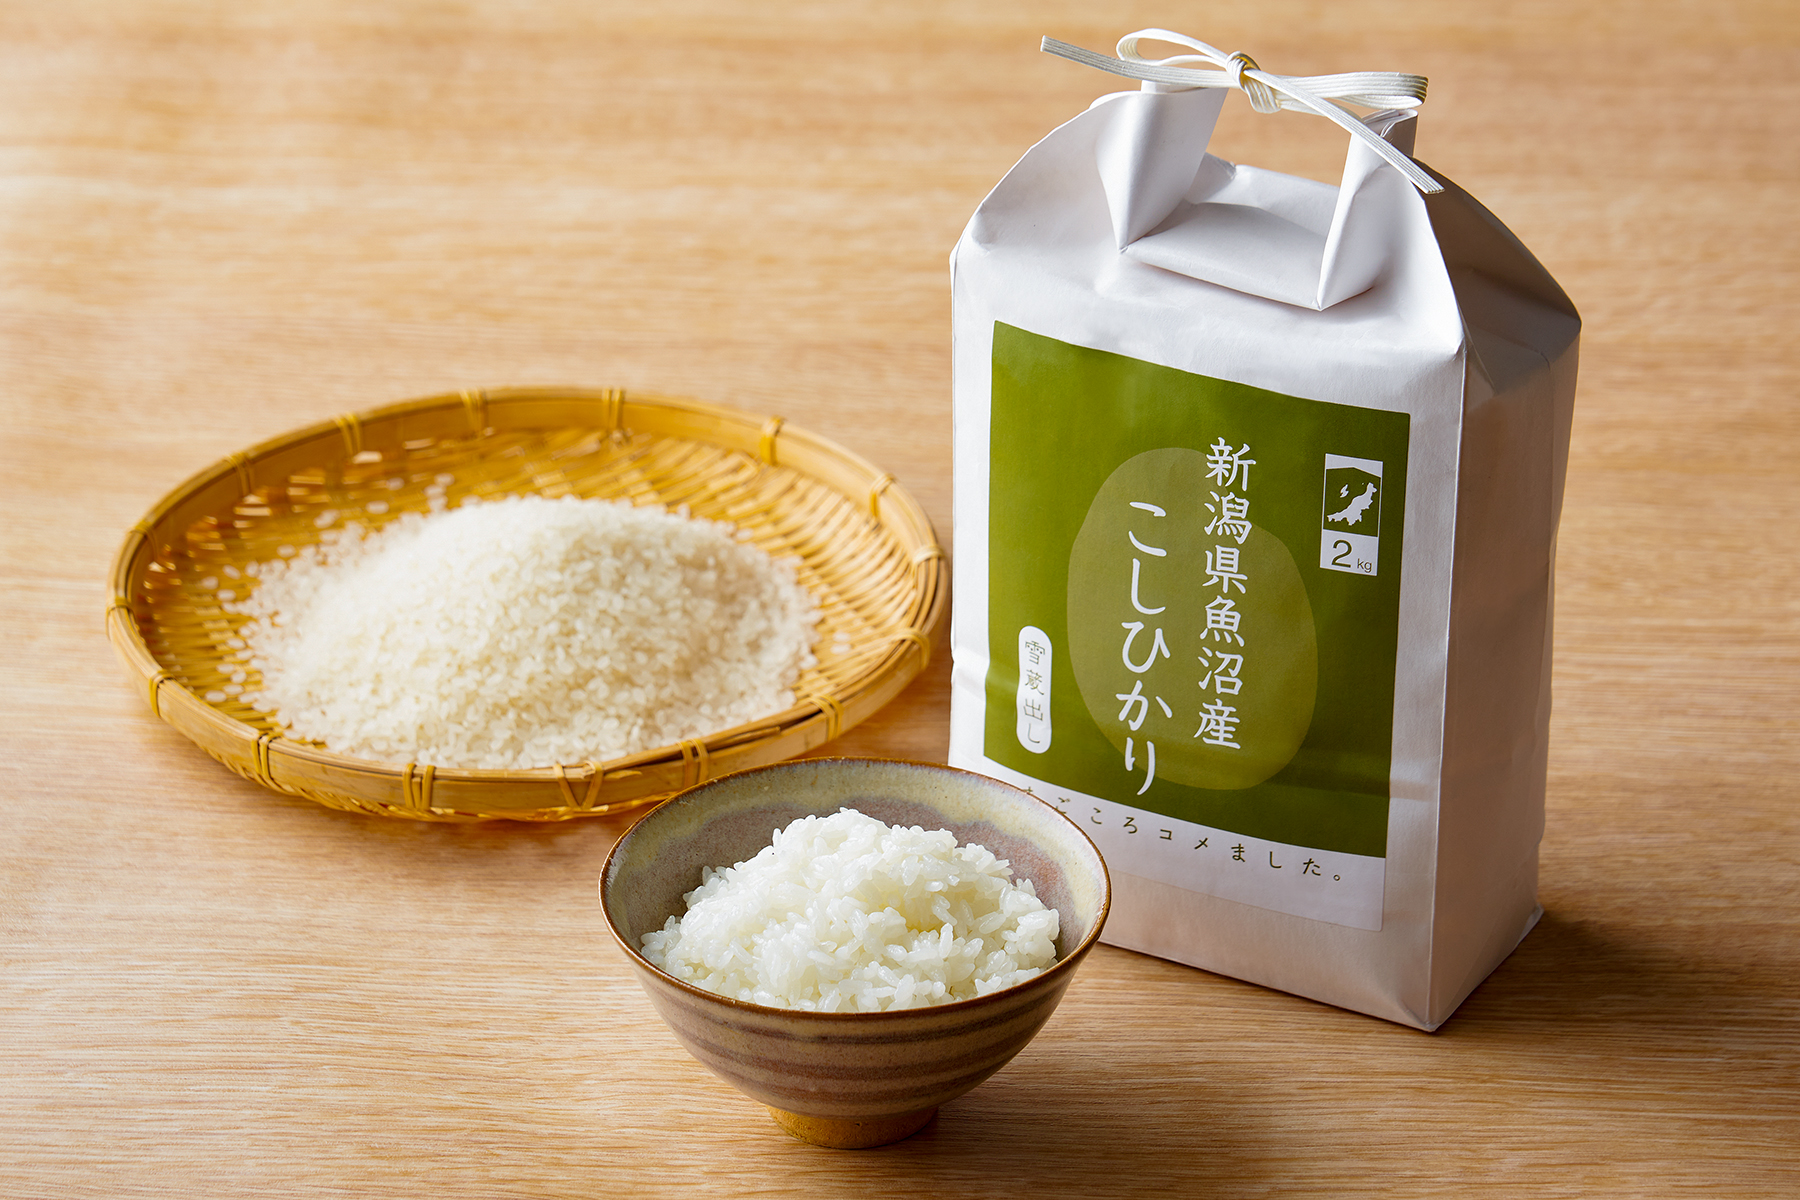 Understanding the Value of Japanese Rice: Different Brands and Prices